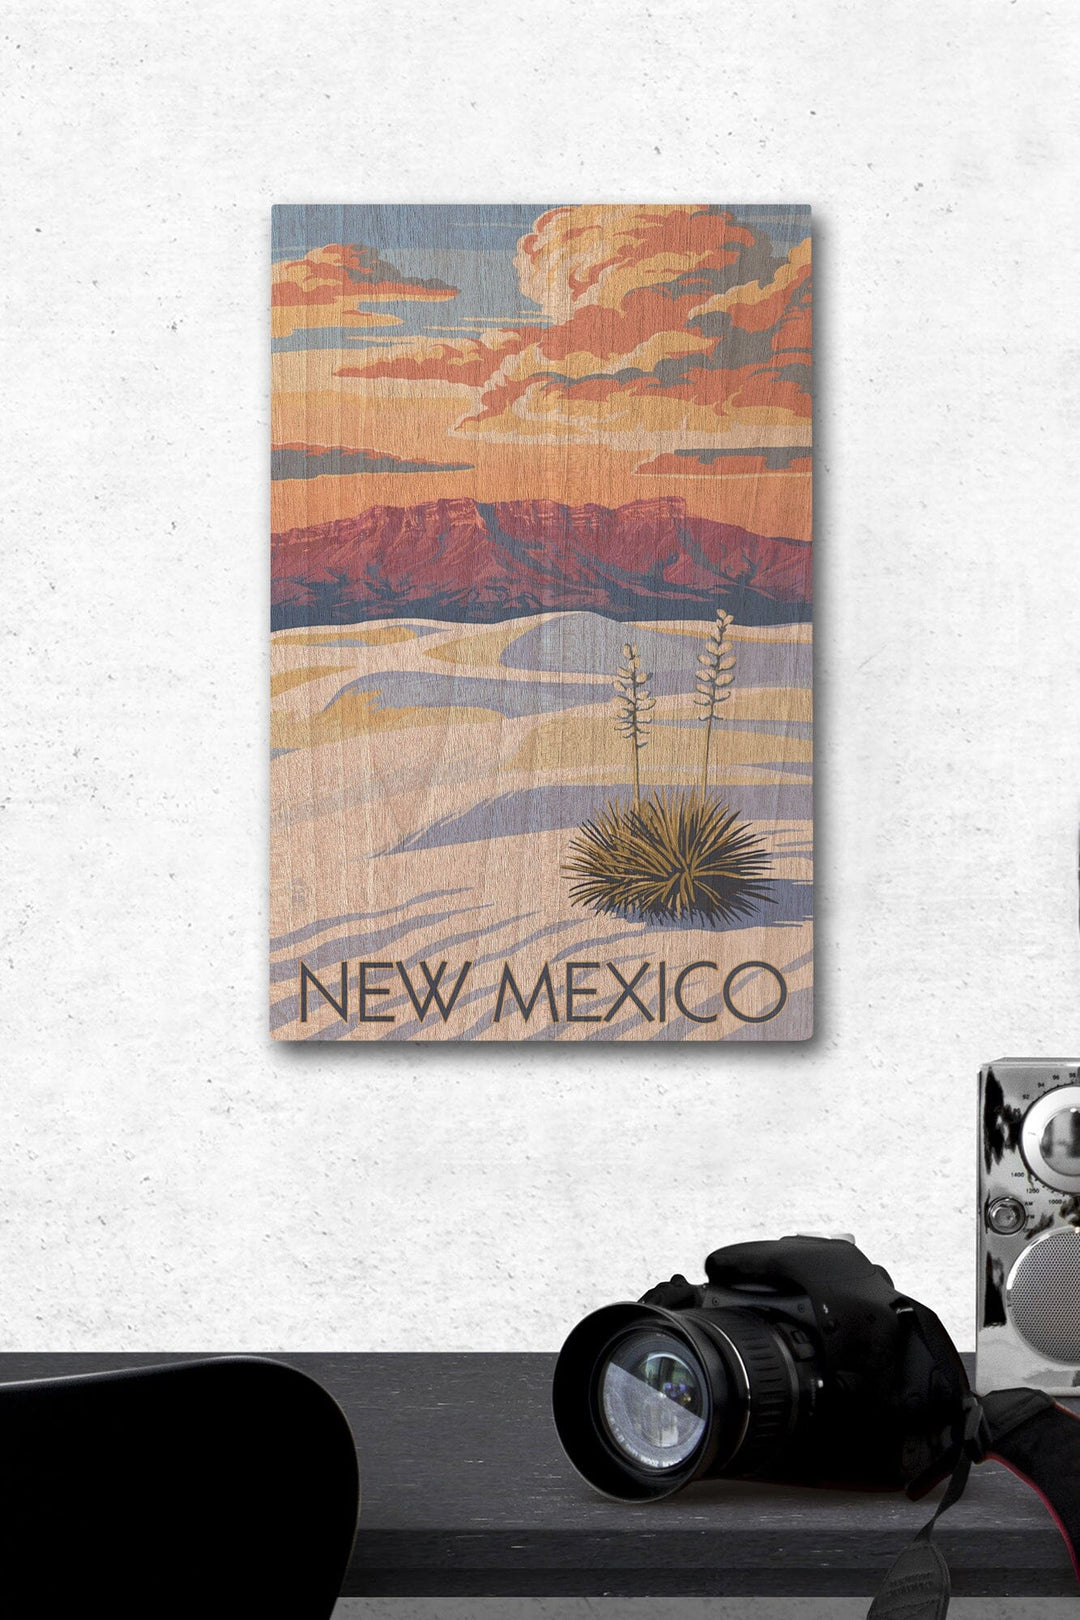 New Mexico, White Sands Sunset, Lantern Press Artwork, Wood Signs and Postcards Wood Lantern Press 12 x 18 Wood Gallery Print 